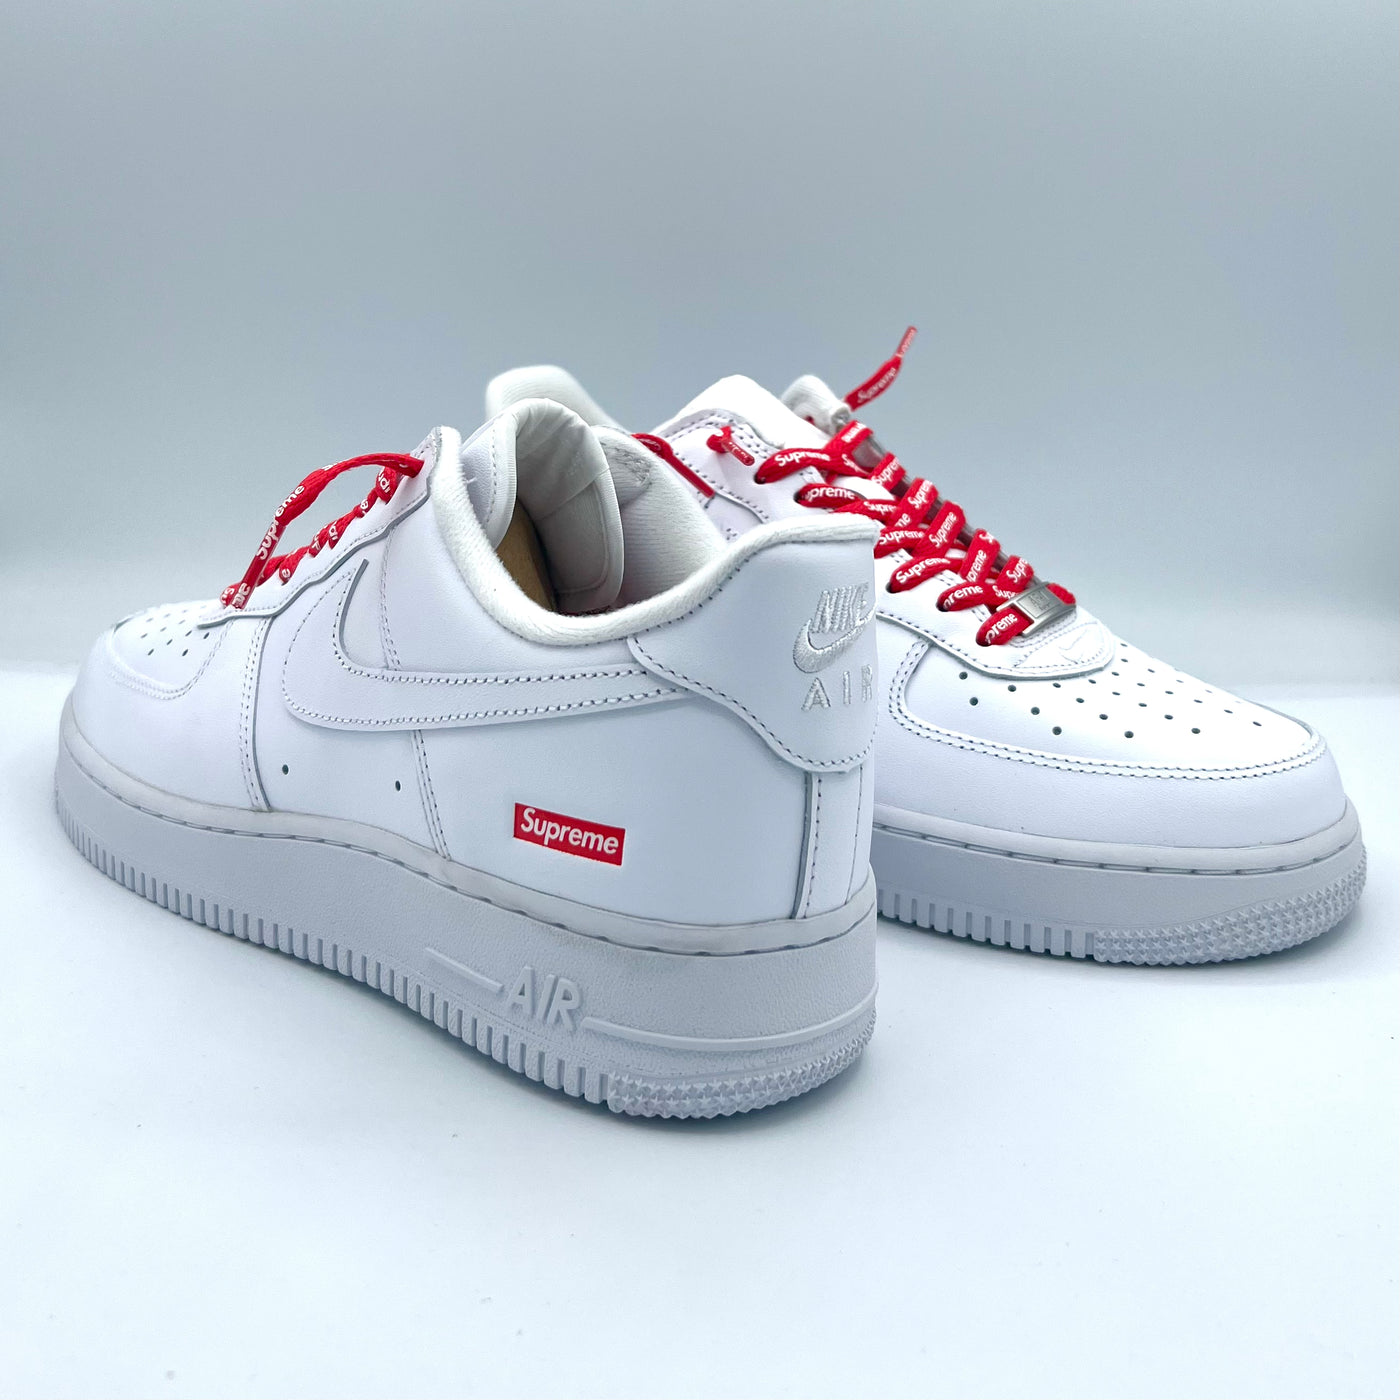 Air Force 1 Low White Supreme